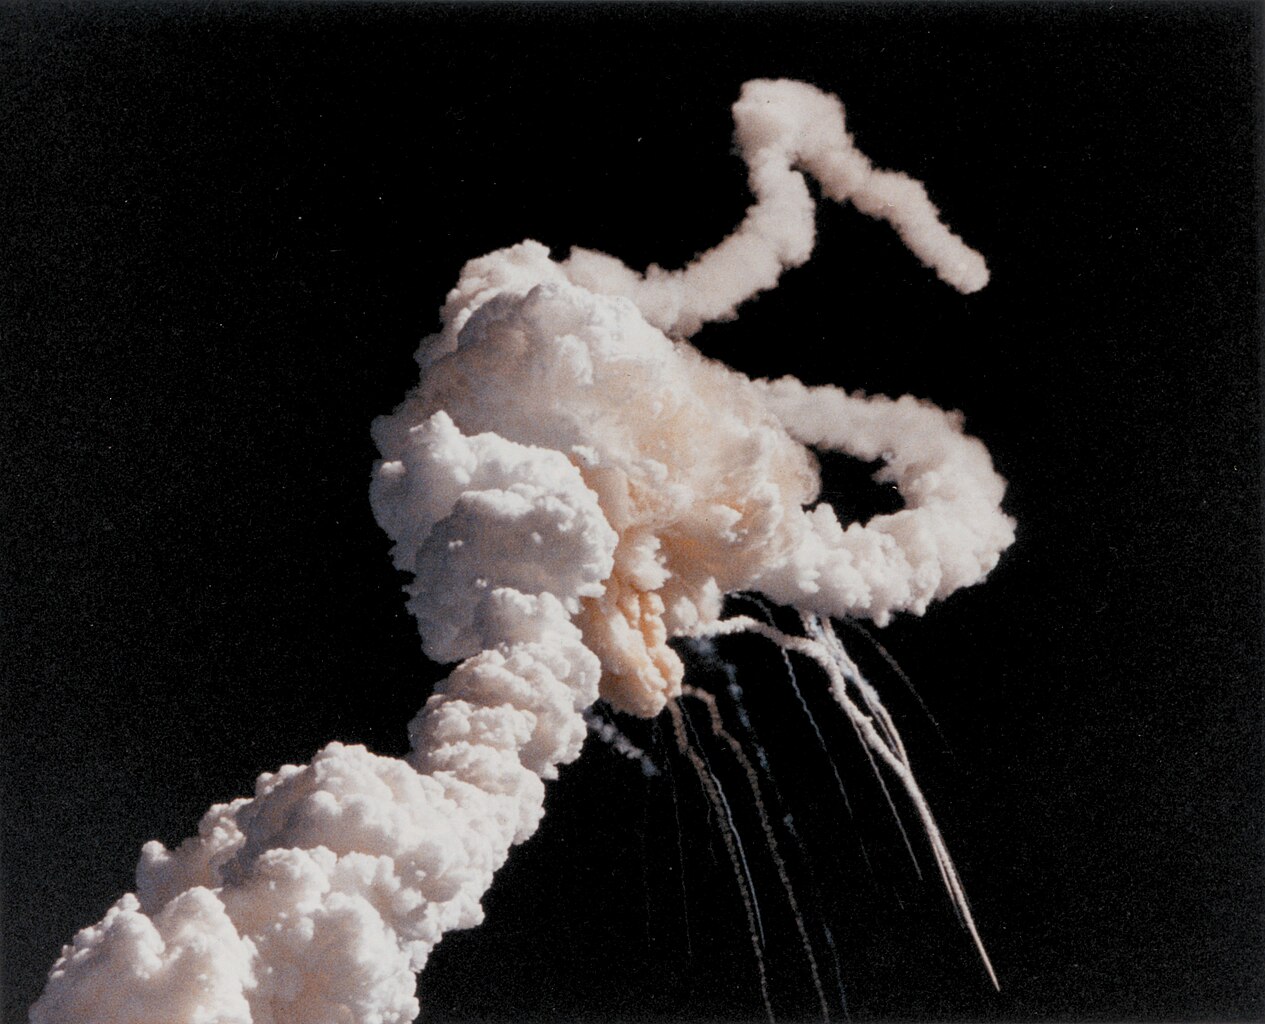 Explosion of the Space Shuttle Challenger shortly after takeoff on January 28,
1986.